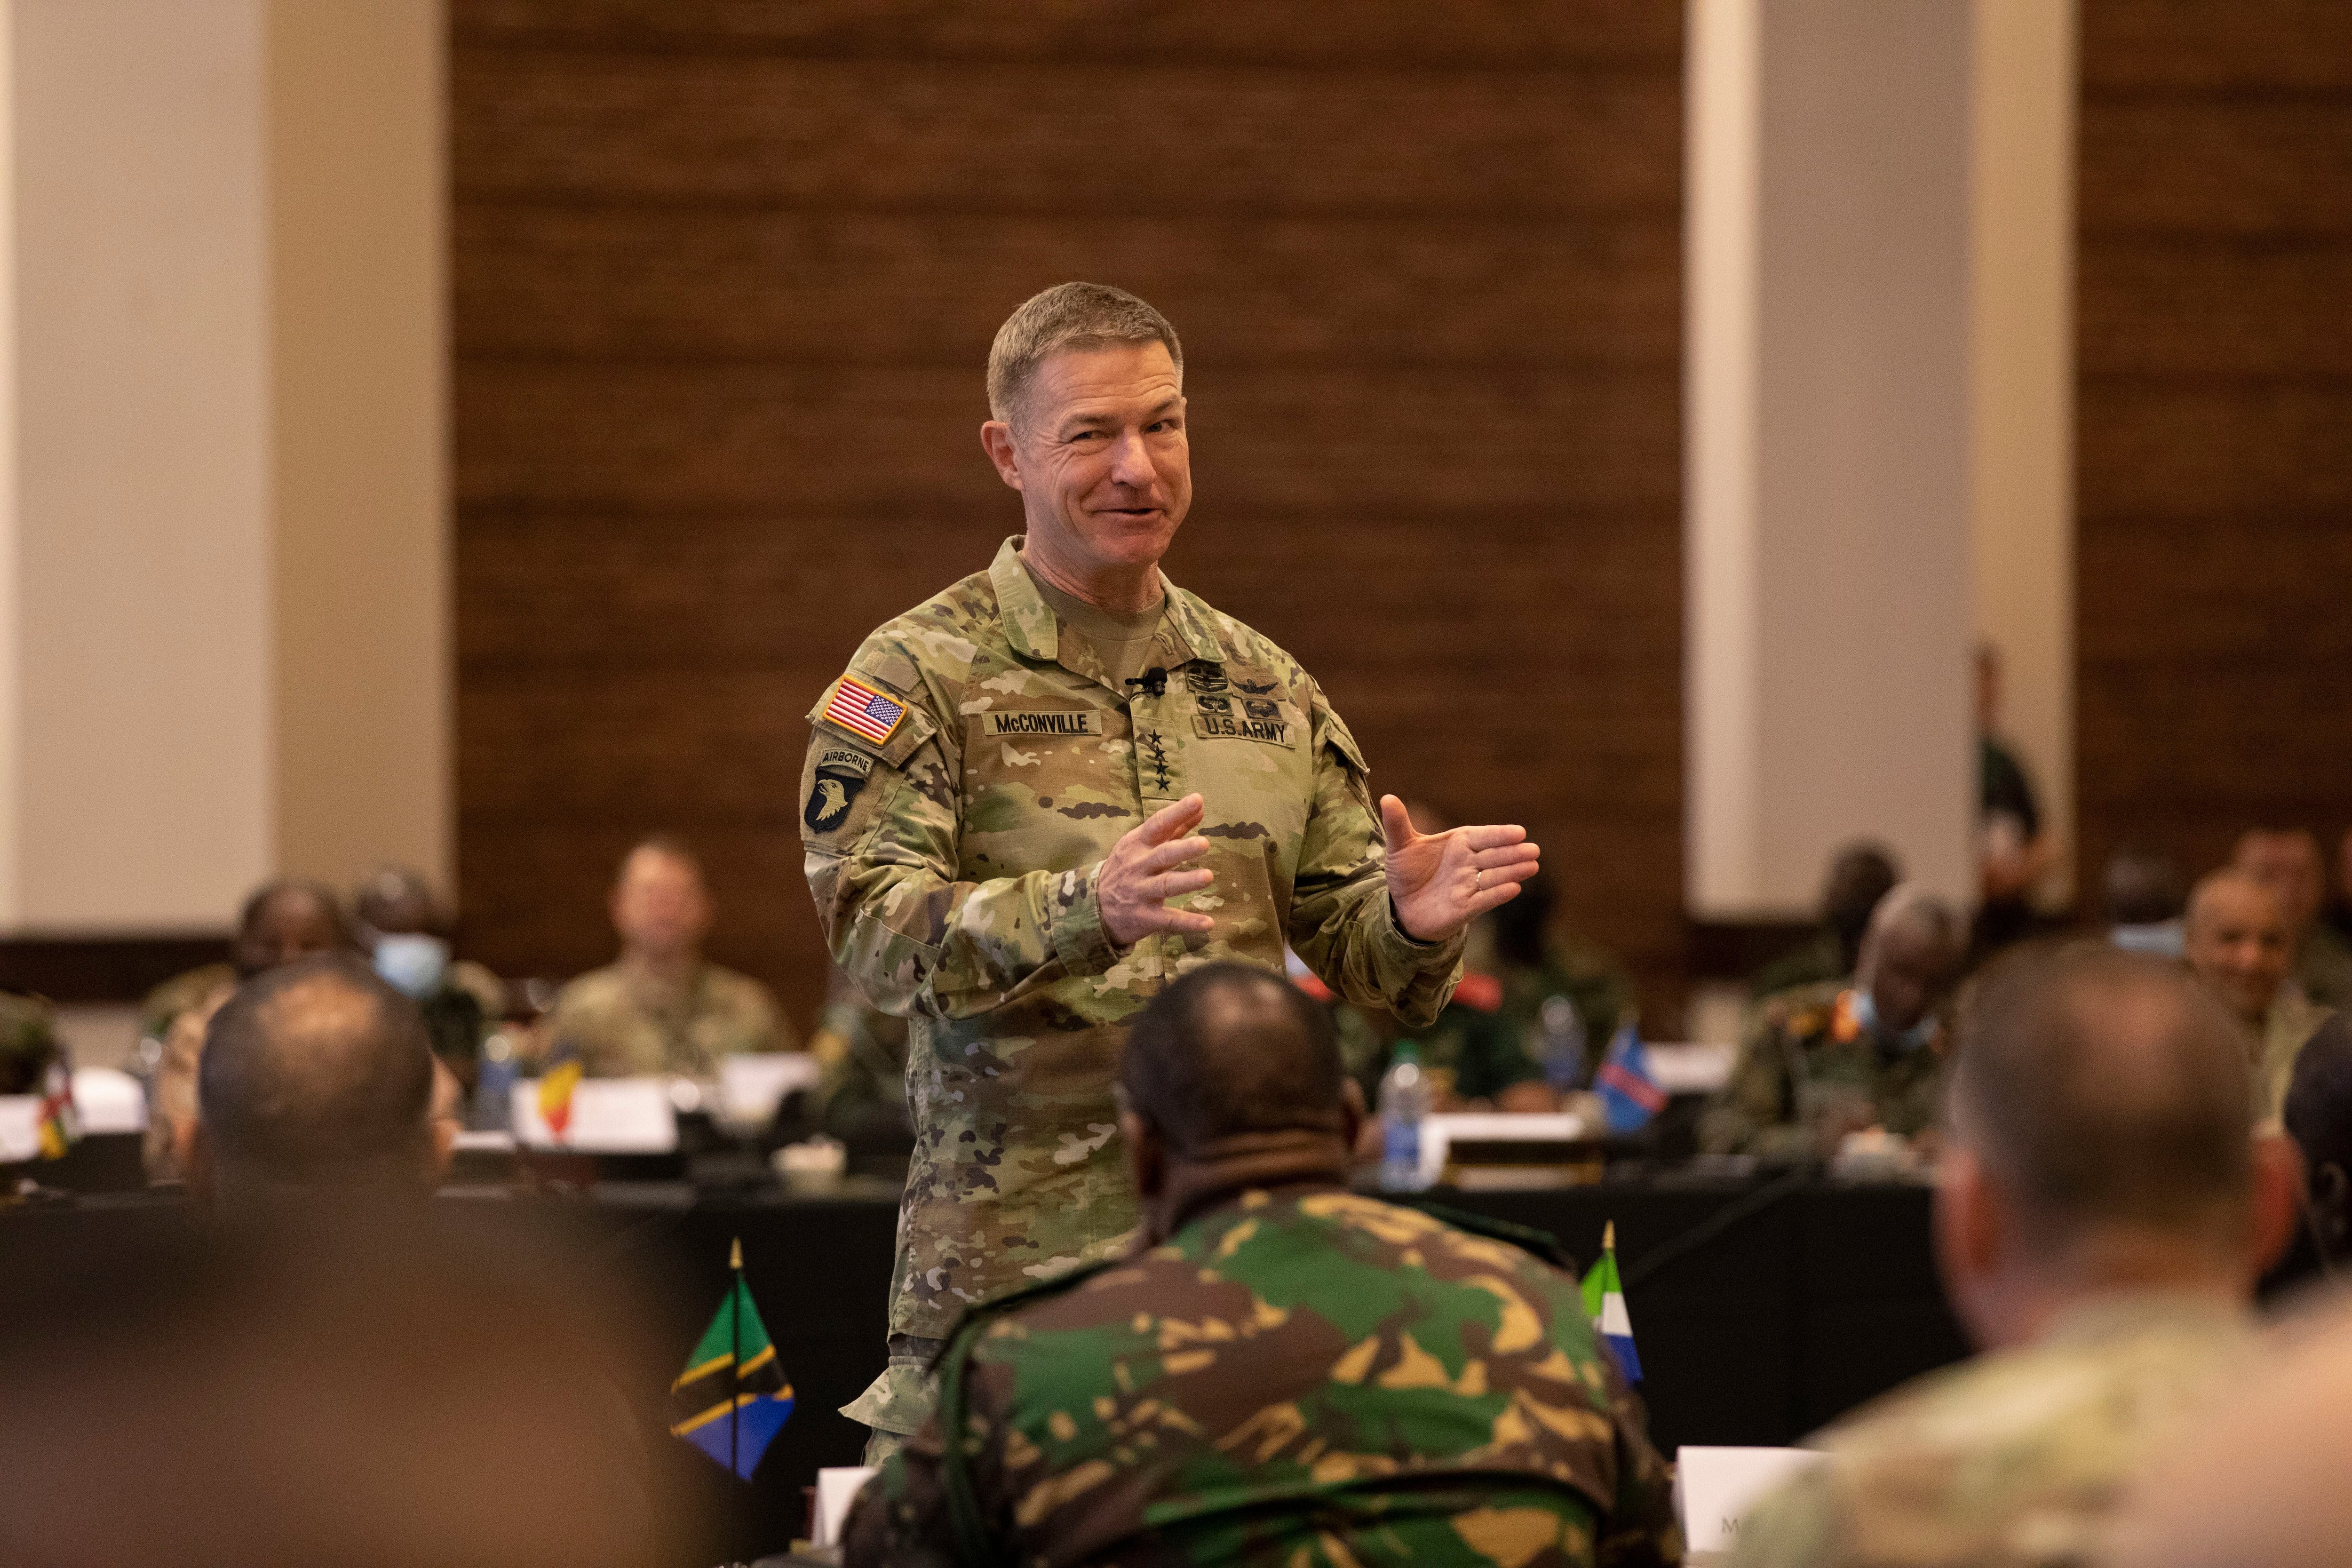 Gen. James C. McConville, Army chief of staff, answers a question following remarks at the African Land Forces Summit on Mar. 22, 2022 at the Columbus Georgia Convention and Trade Center in Columbus, Georgia. (Army/Sgt. Tianna Field)